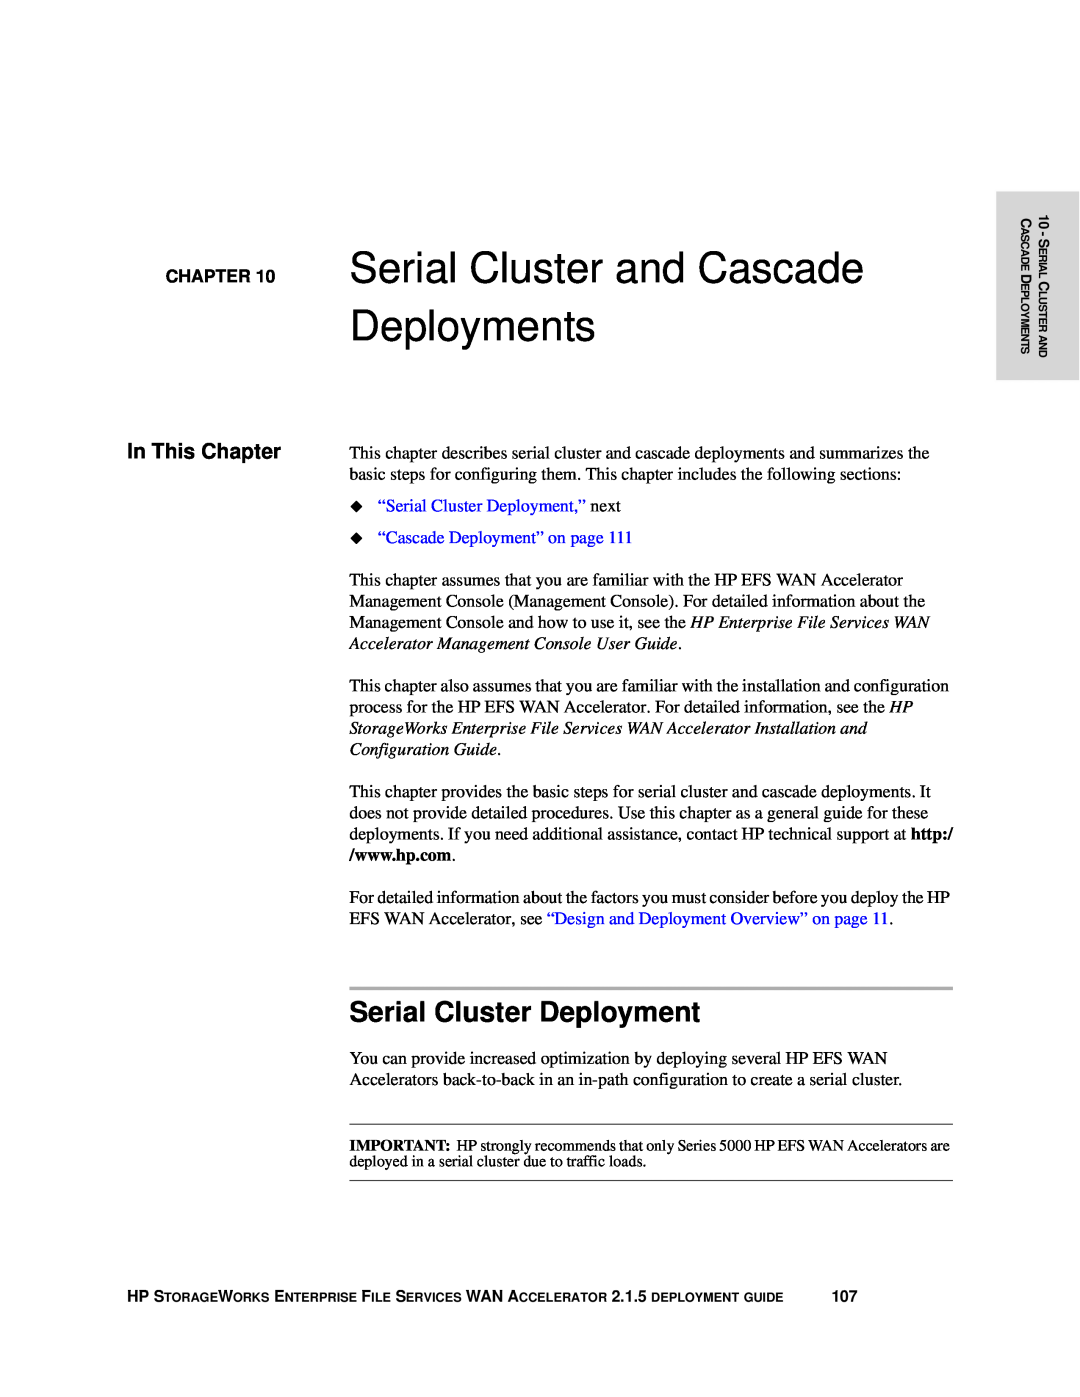 HP Enterprise File Services WAN Accelerator manual Serial Cluster and Cascade Deployments, Serial Cluster Deployment 